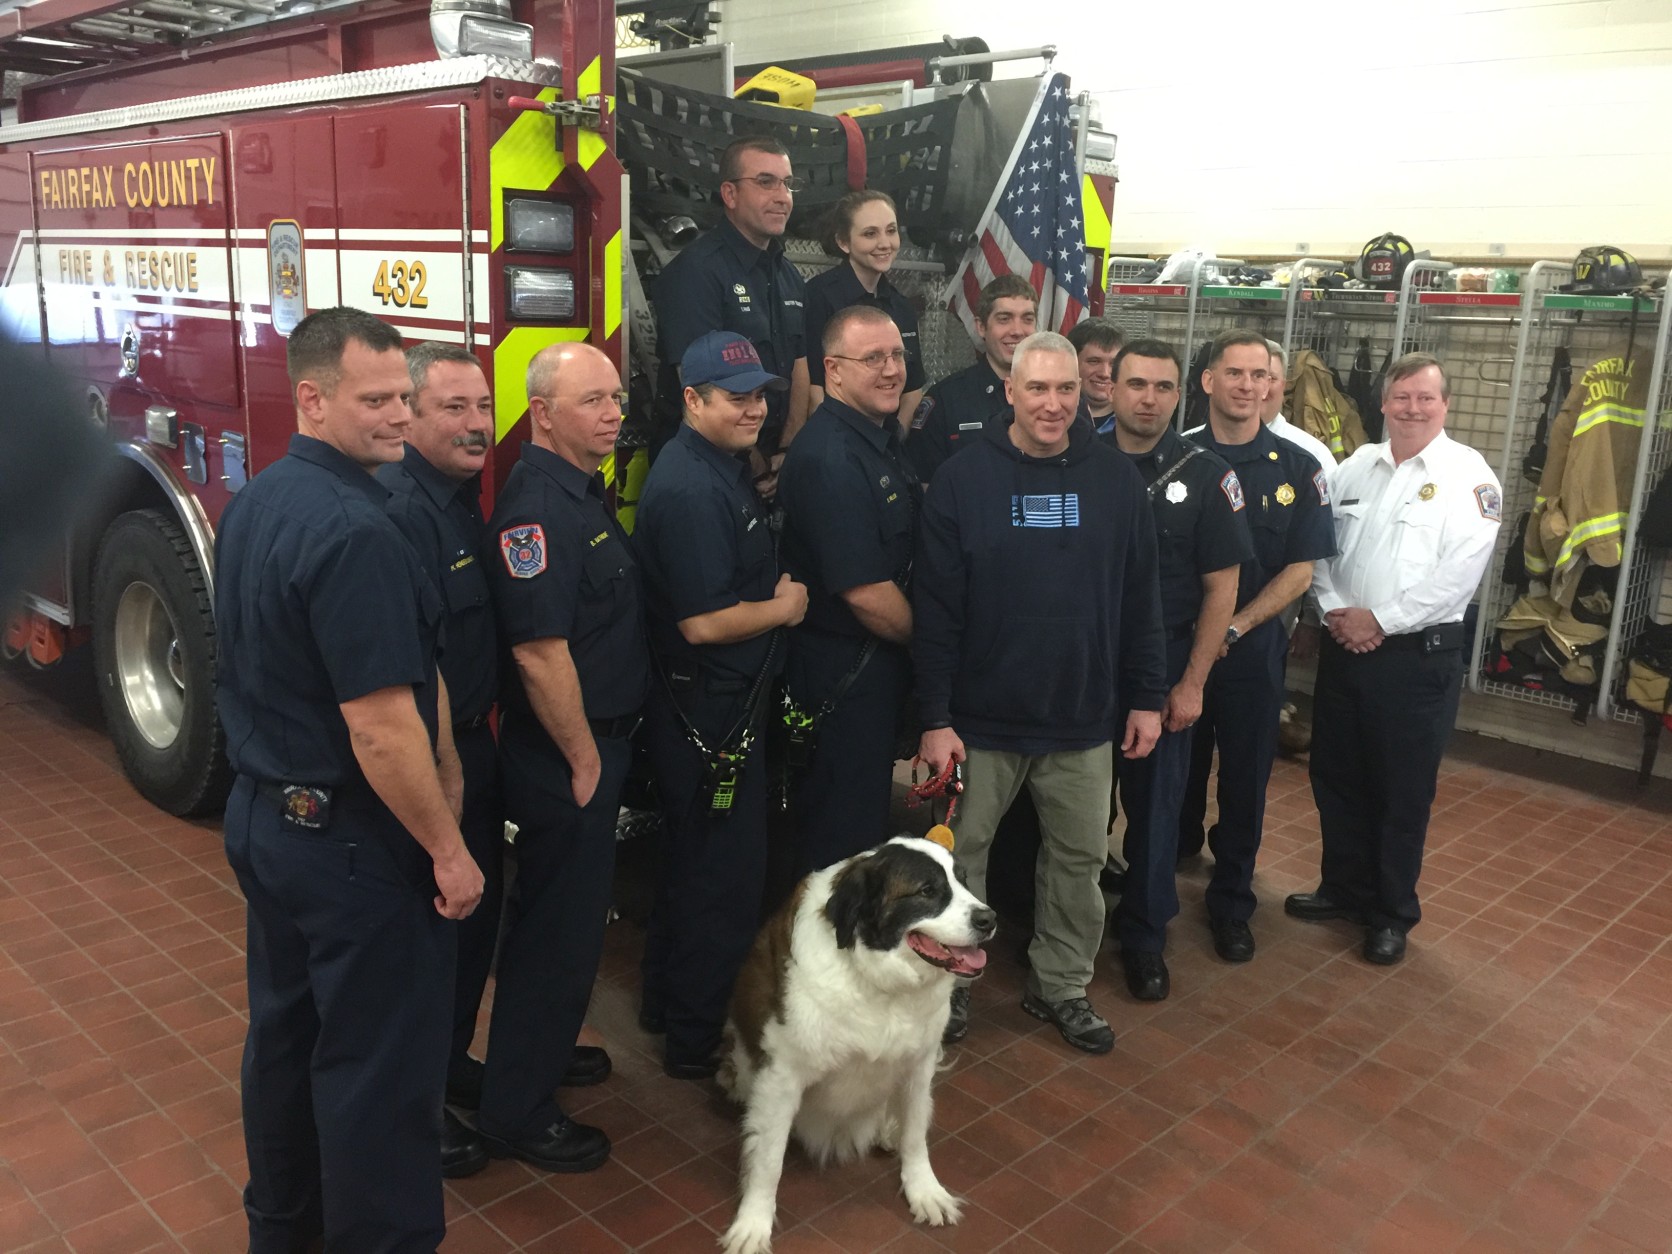  

Mark Wortman with his dog Milo's rescuers: Medics from Fairfax County Fire & Rescue Station 32 in Burke Centre, assisted Milo once he was freed from the pond. A crew from City of Fairfax Station 403 was the first to get into the water. The rescue squad from Burke Fire Station 14 was standing-by as back-up in case the water rescue team got into trouble or needed assistance. (WTOP/Kristi King)